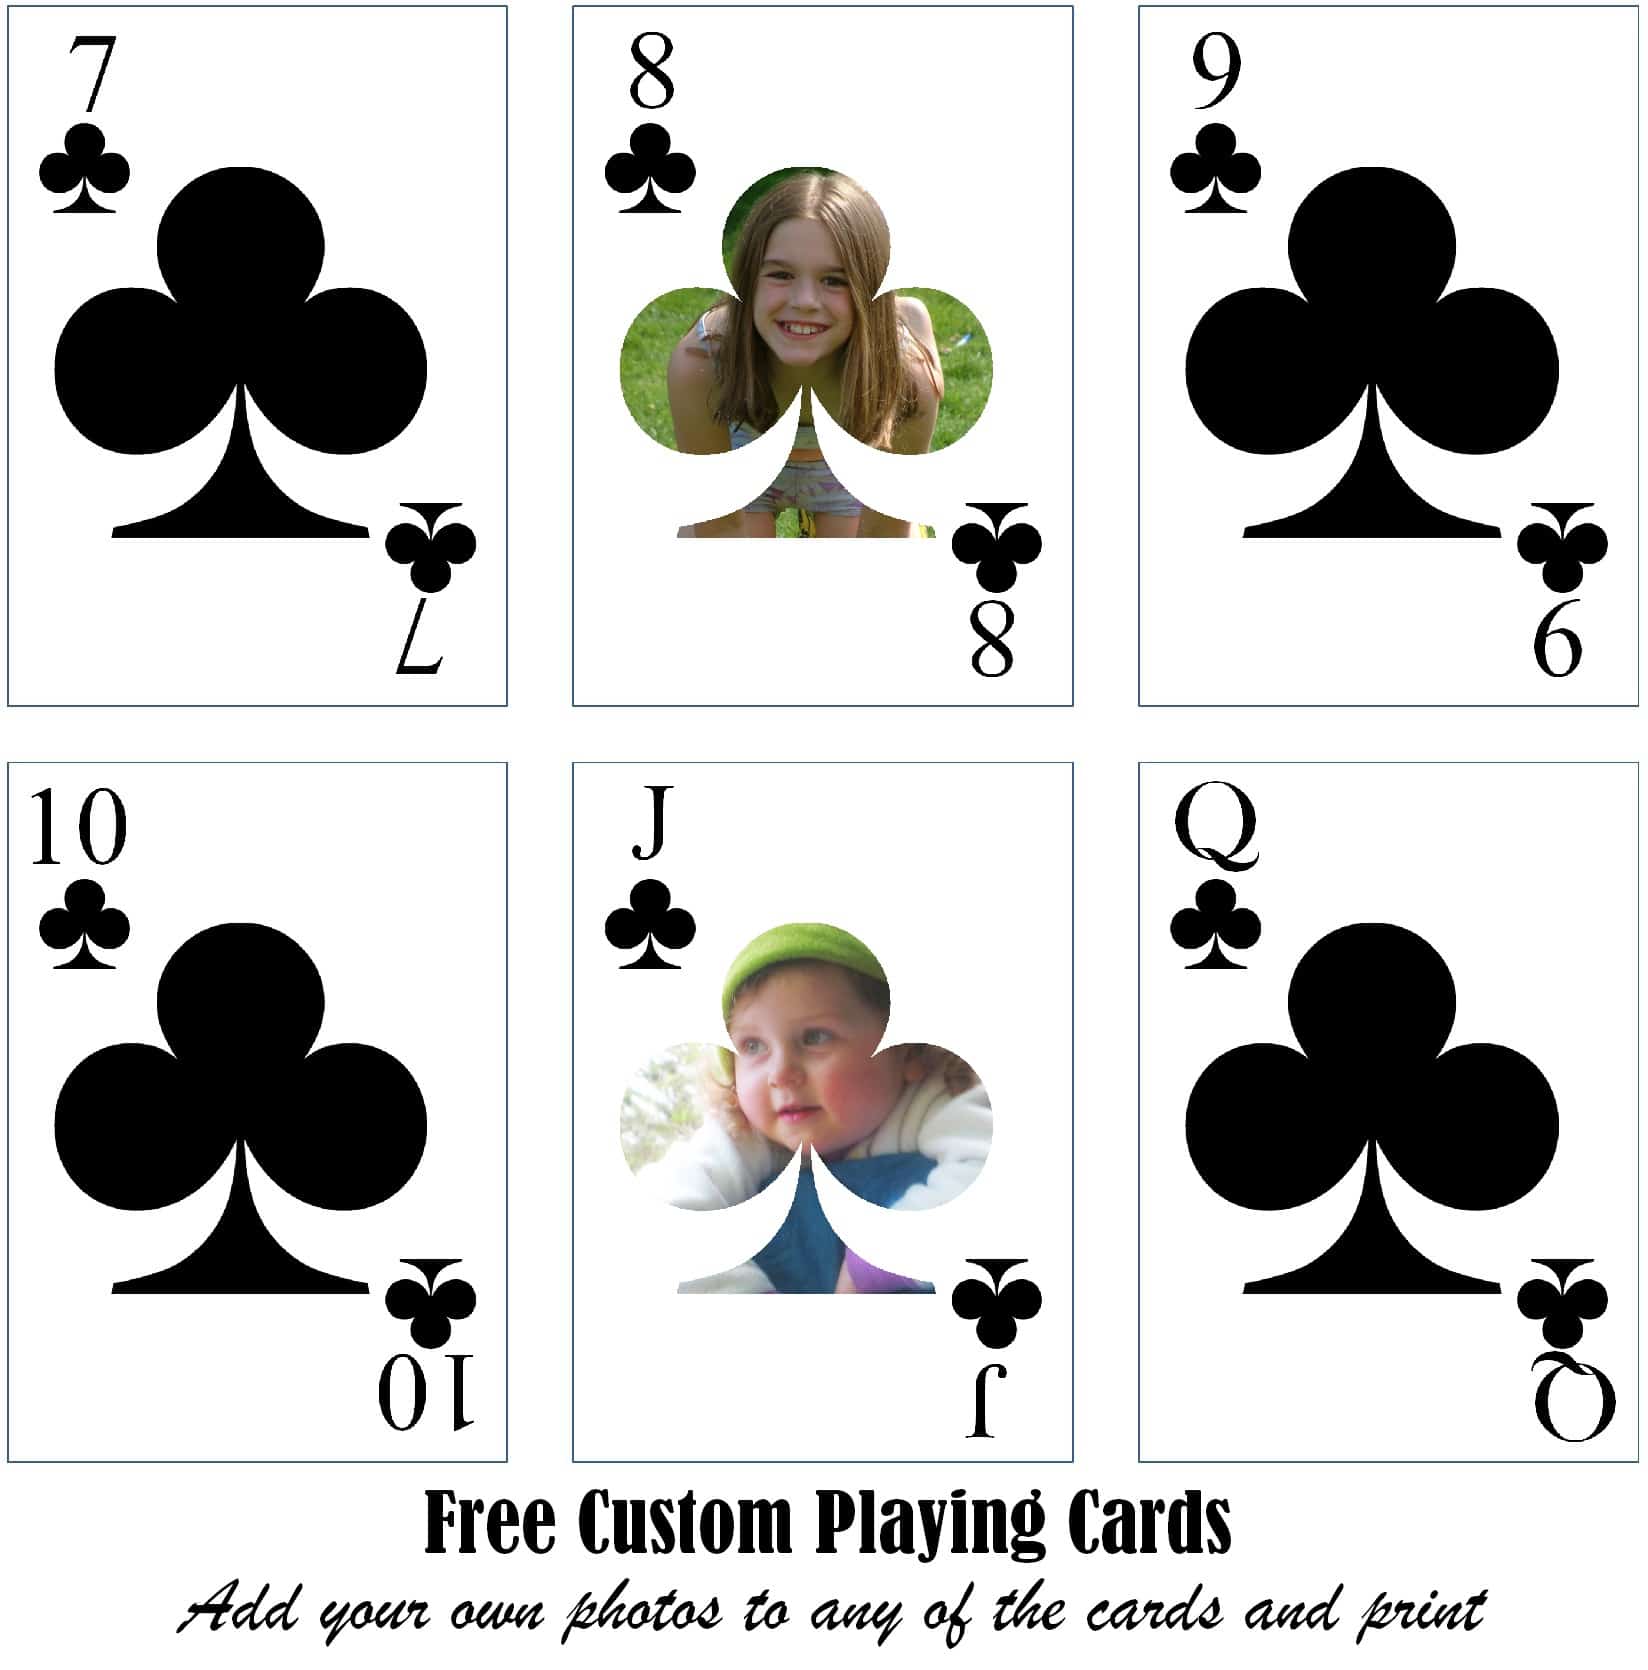 Free Printable Custom Playing Cards  Add Your Photo and/or Text In Free Printable Playing Cards Template